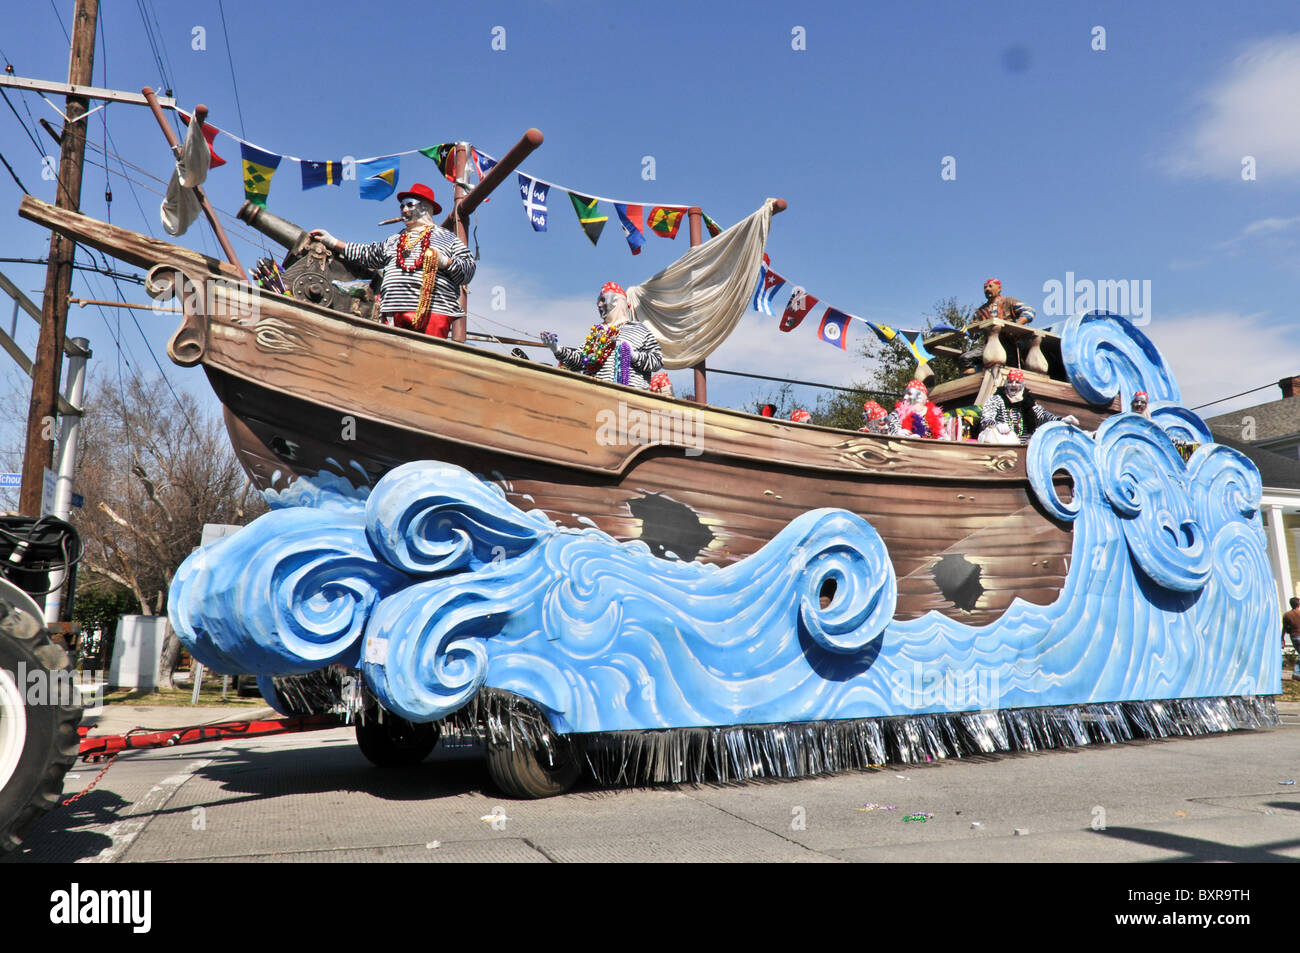 Rum Runner' (type of drink) float in Krewe of Thoth parade, Mardi Gras 2010, New Orleans, Louisiana Stock Photo